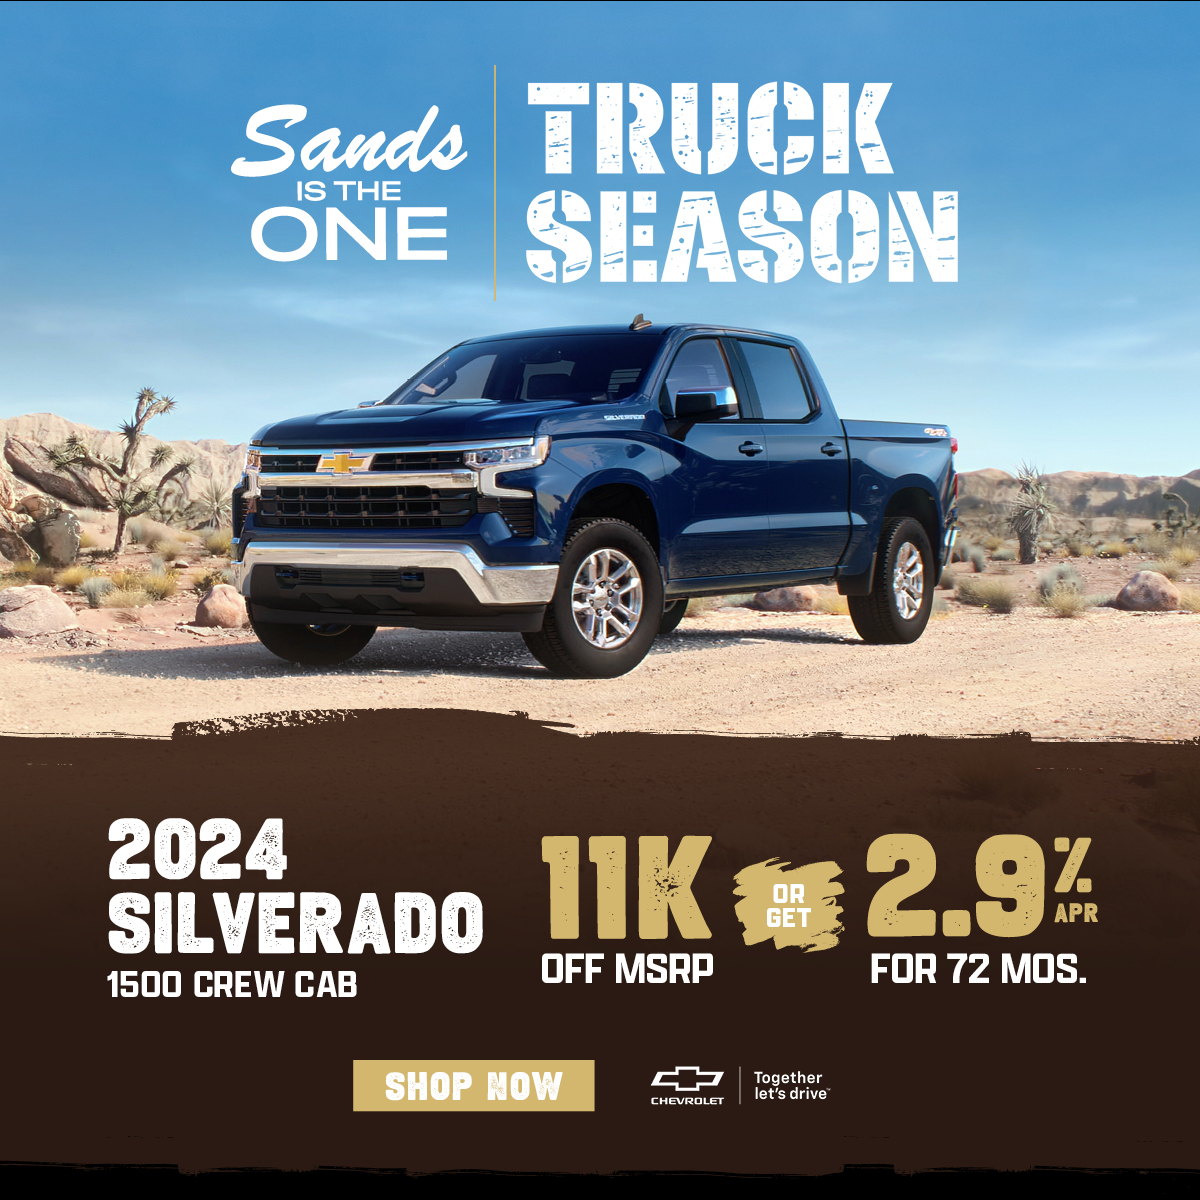 🌟 Spring into action with the 2024 Chevrolet Silverado 1500! Choose to save over $11,000 off MSRP or opt for a low 2.9% APR for up to 72 mos! 🌄🚚 Tailor your deal to your adventure! #ChevroletSilverado #Silverado1500

Shop For Yours at 👉 p1.tt/49FeY5x